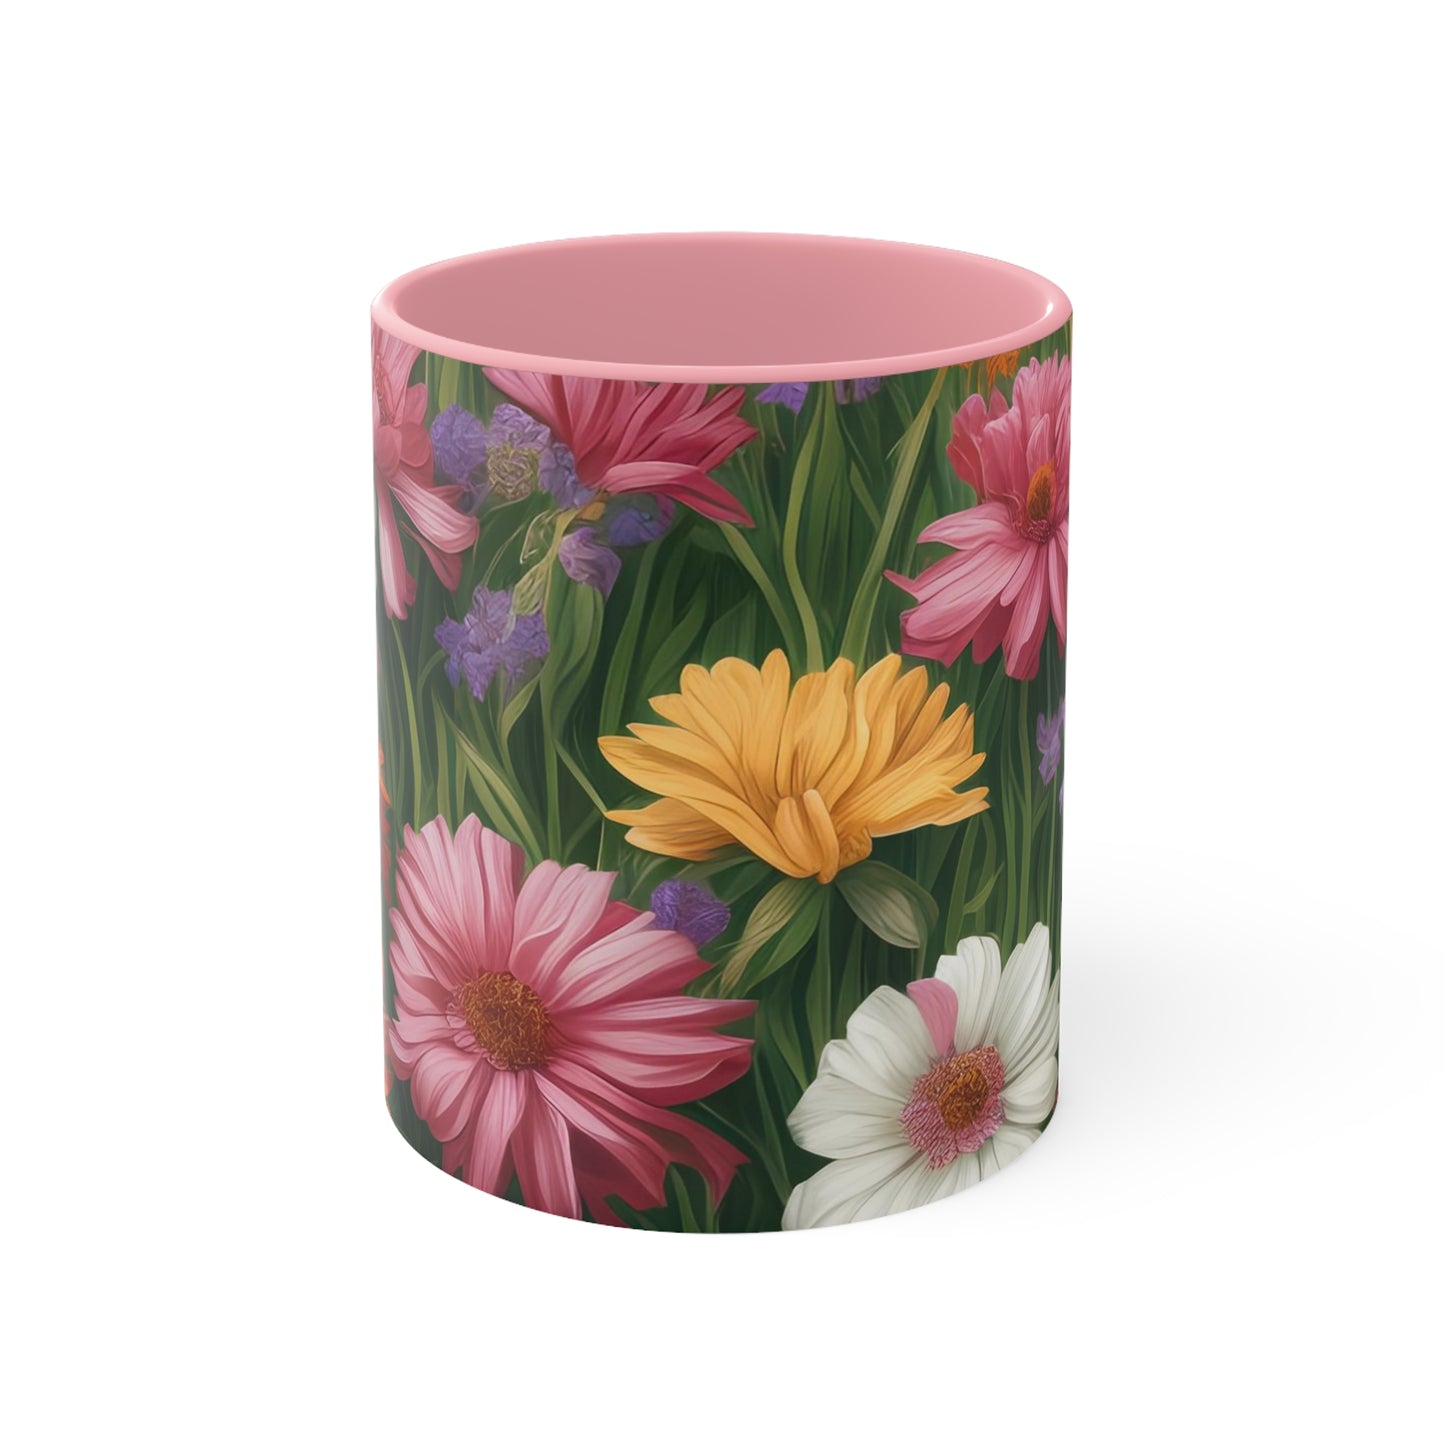 Wildflower Field, Ceramic Mug - Perfect for Coffee, Tea, and More!